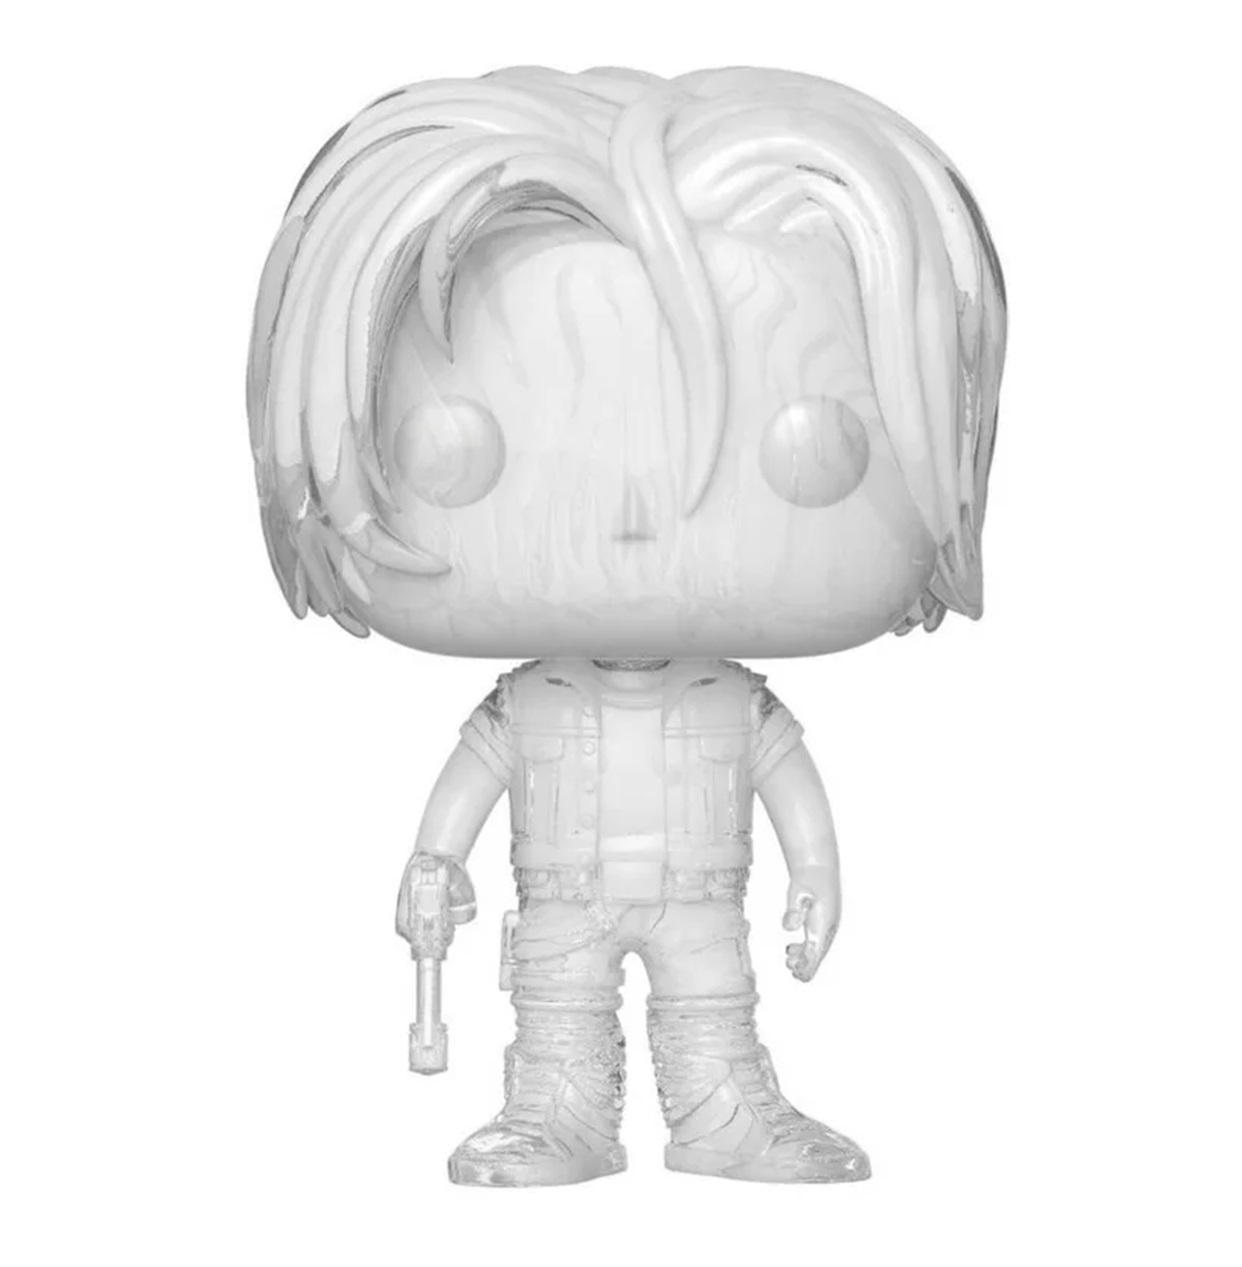 Parzival #496 Figura Ready Player One Funko Pop! Hot Topic